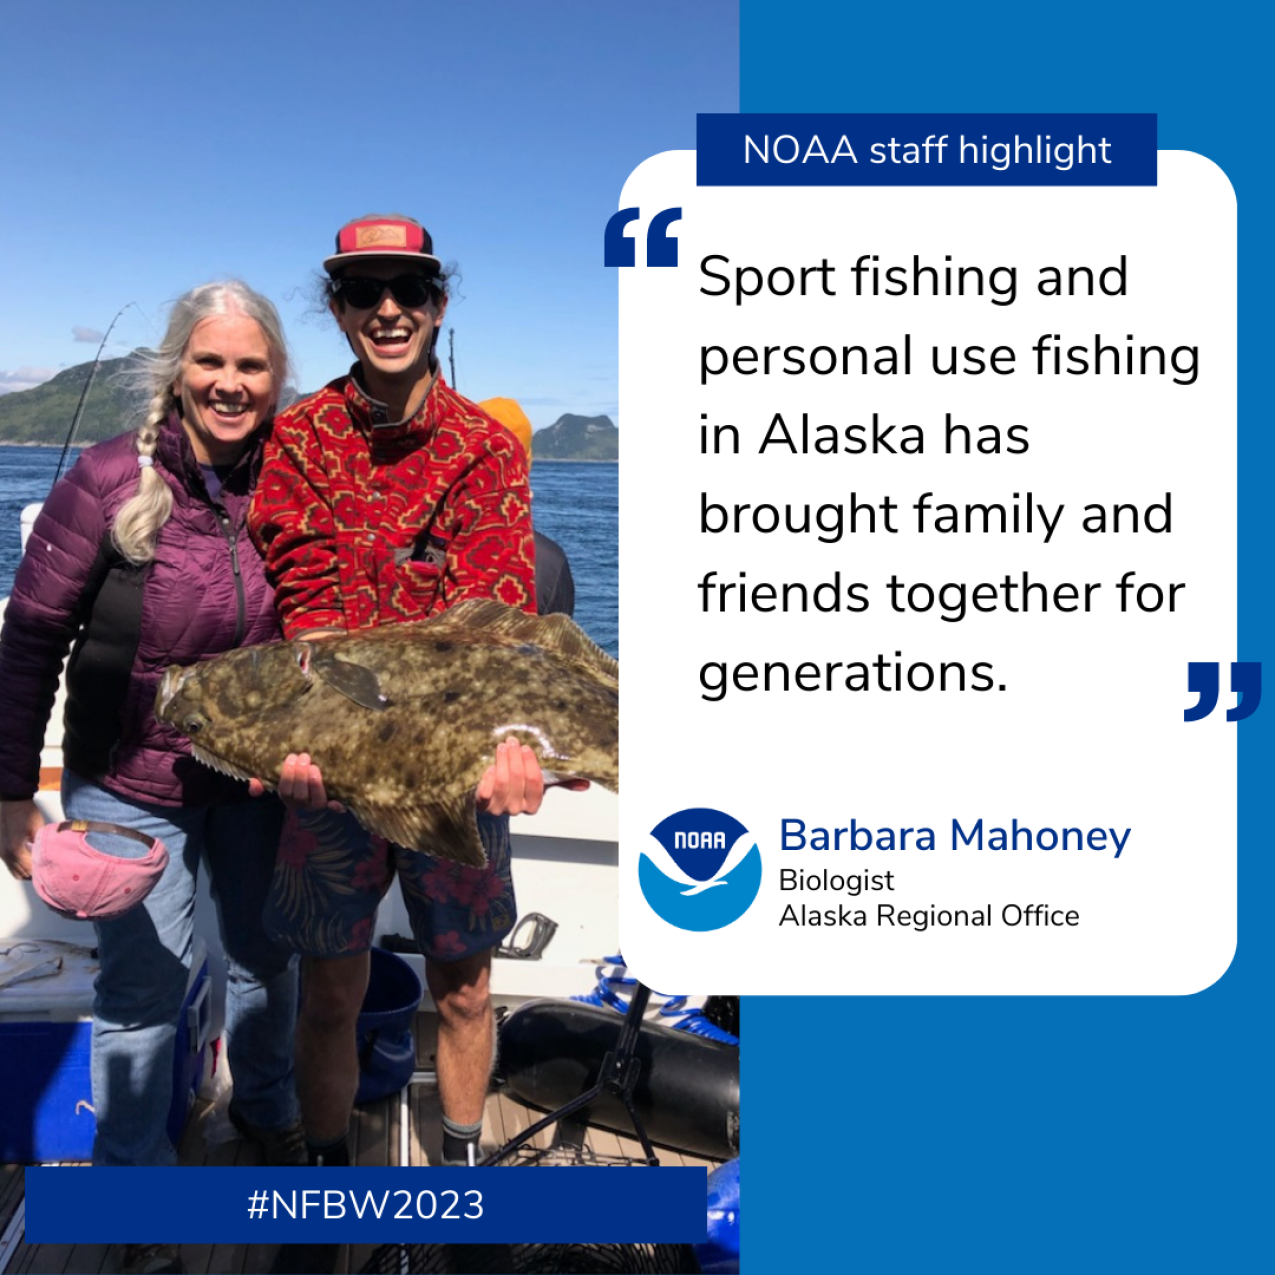 A quote alongside a photo of two people smiling and standing on a boat. The person on the right is holding up a fish horizontally. The text reads: “Sport fishing and personal use fishing in Alaska has brought family and friends together for generations.” Barbara Mahoney, Biologist, Alaska Regional Office.